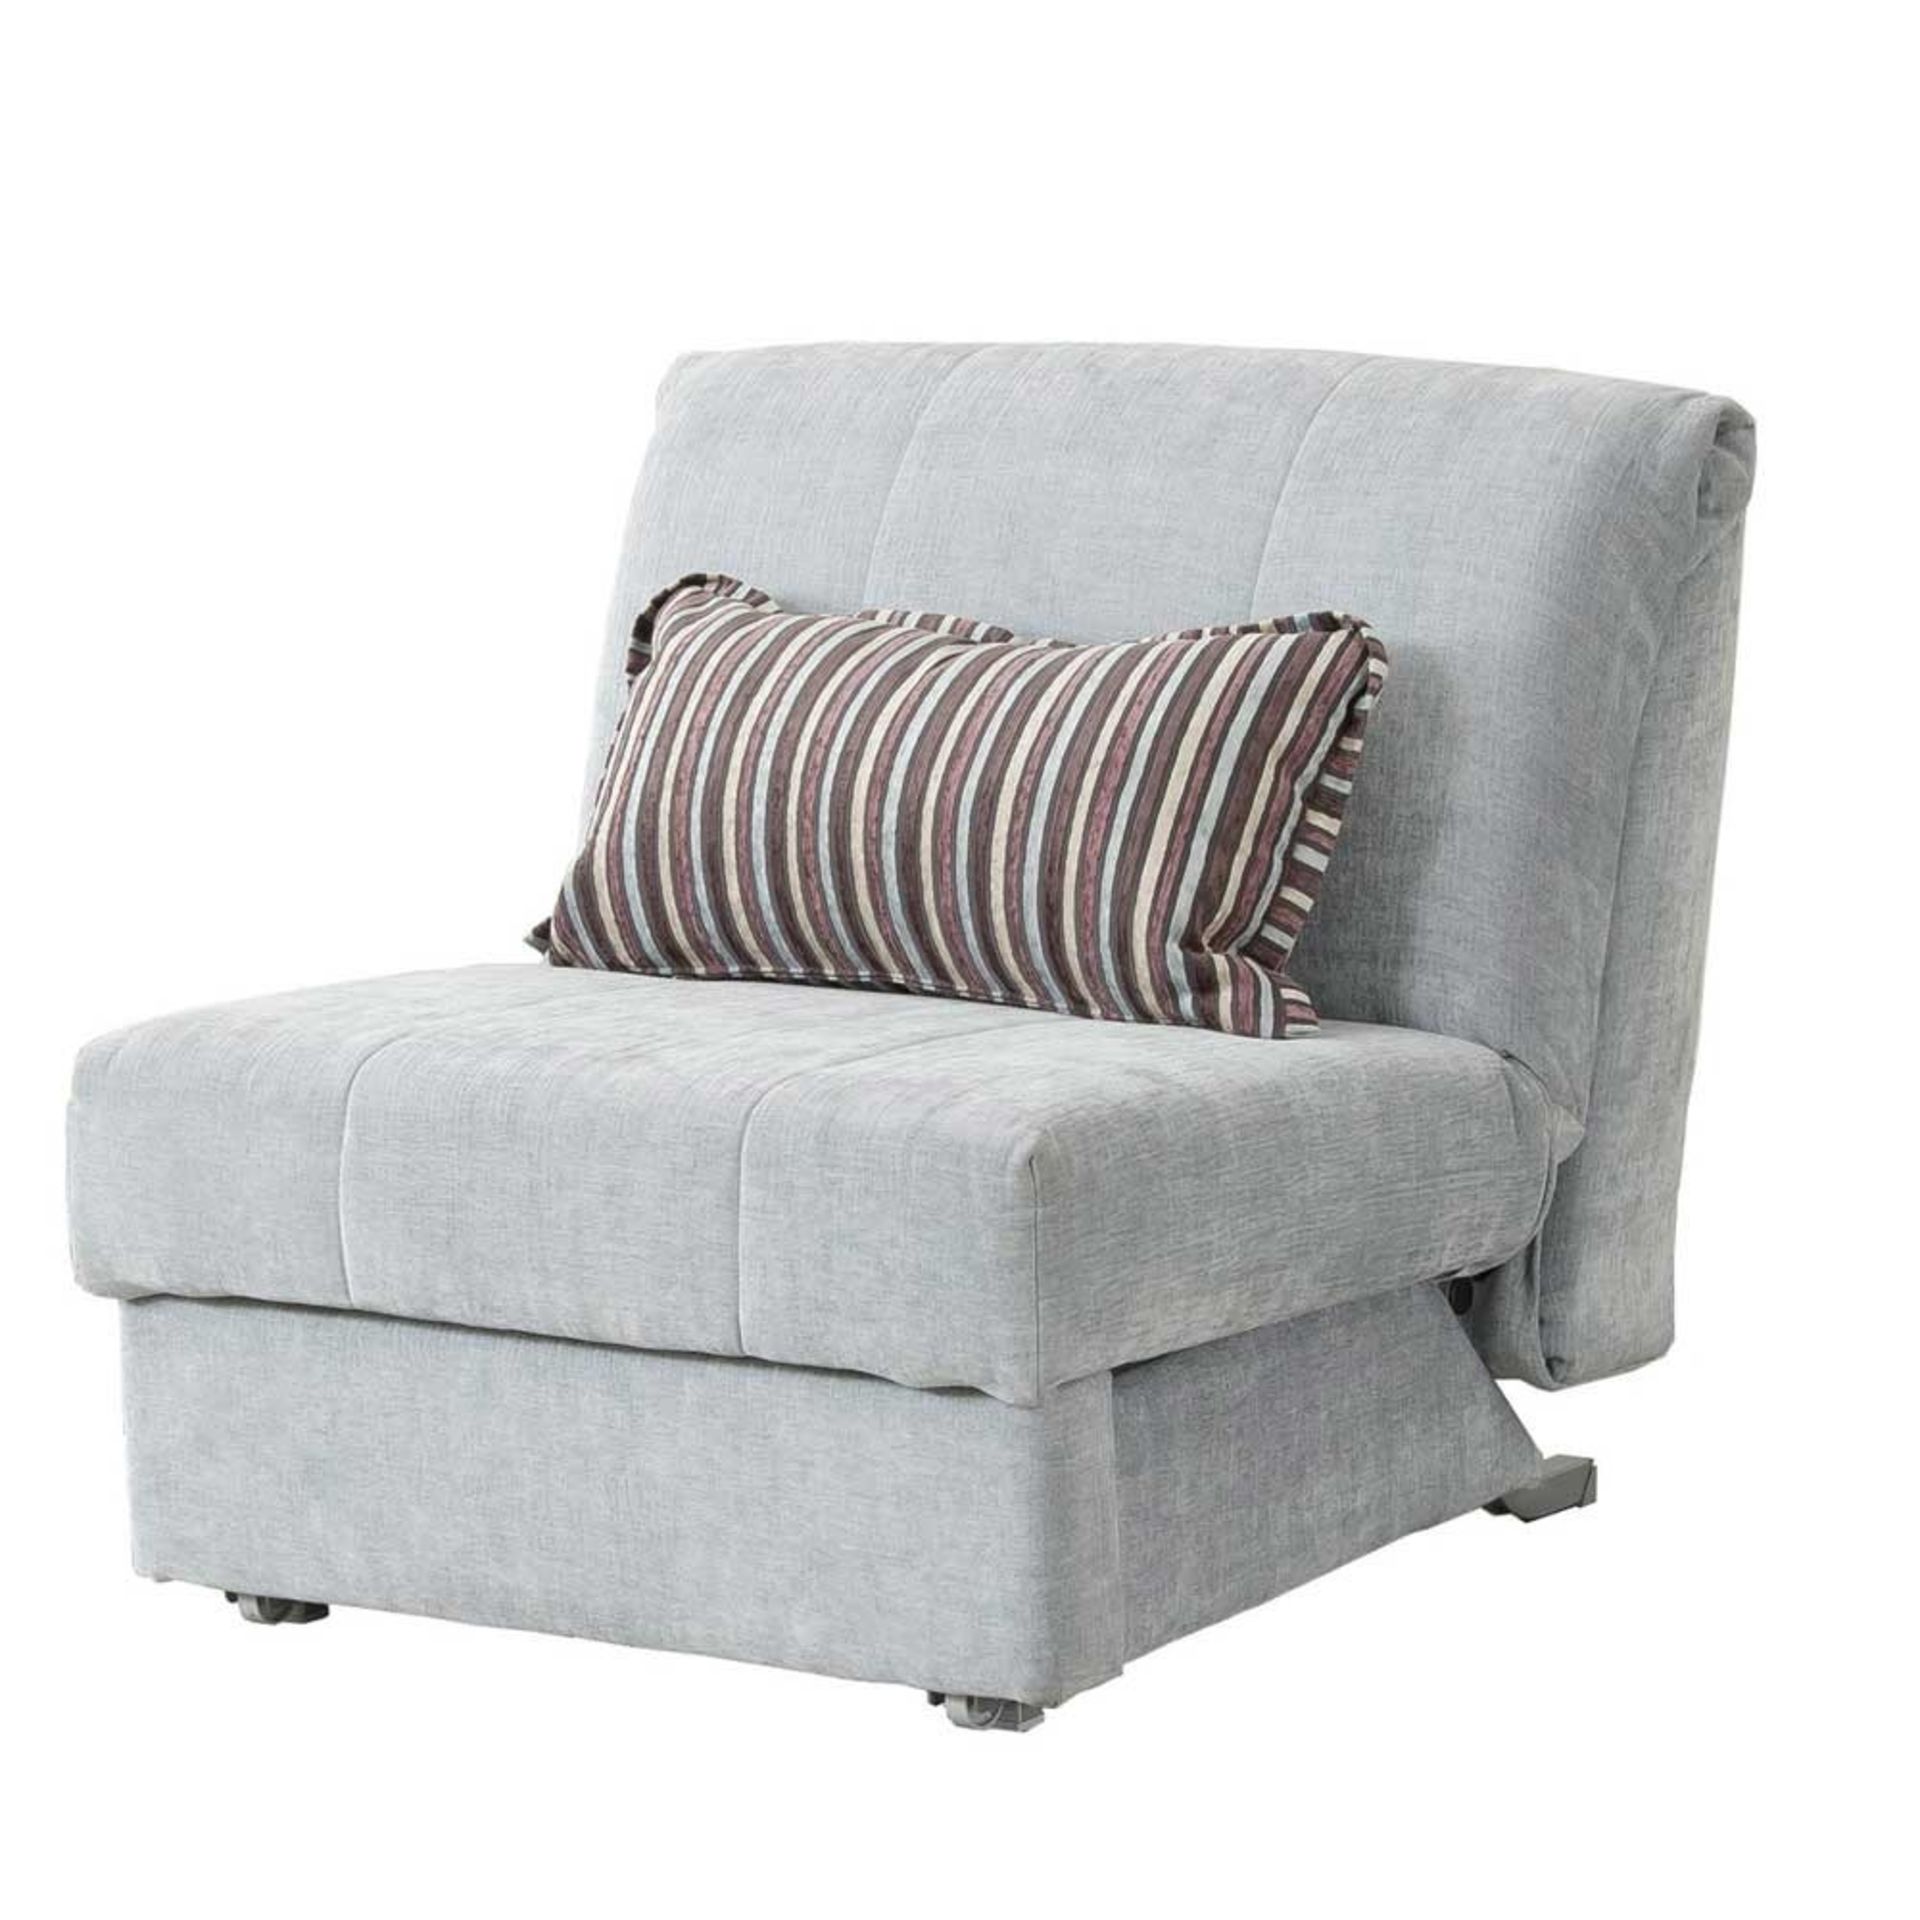 Metz Sofa 80cm Berwick Megan Nature Upholstered The Metz collection is ideal even for smaller